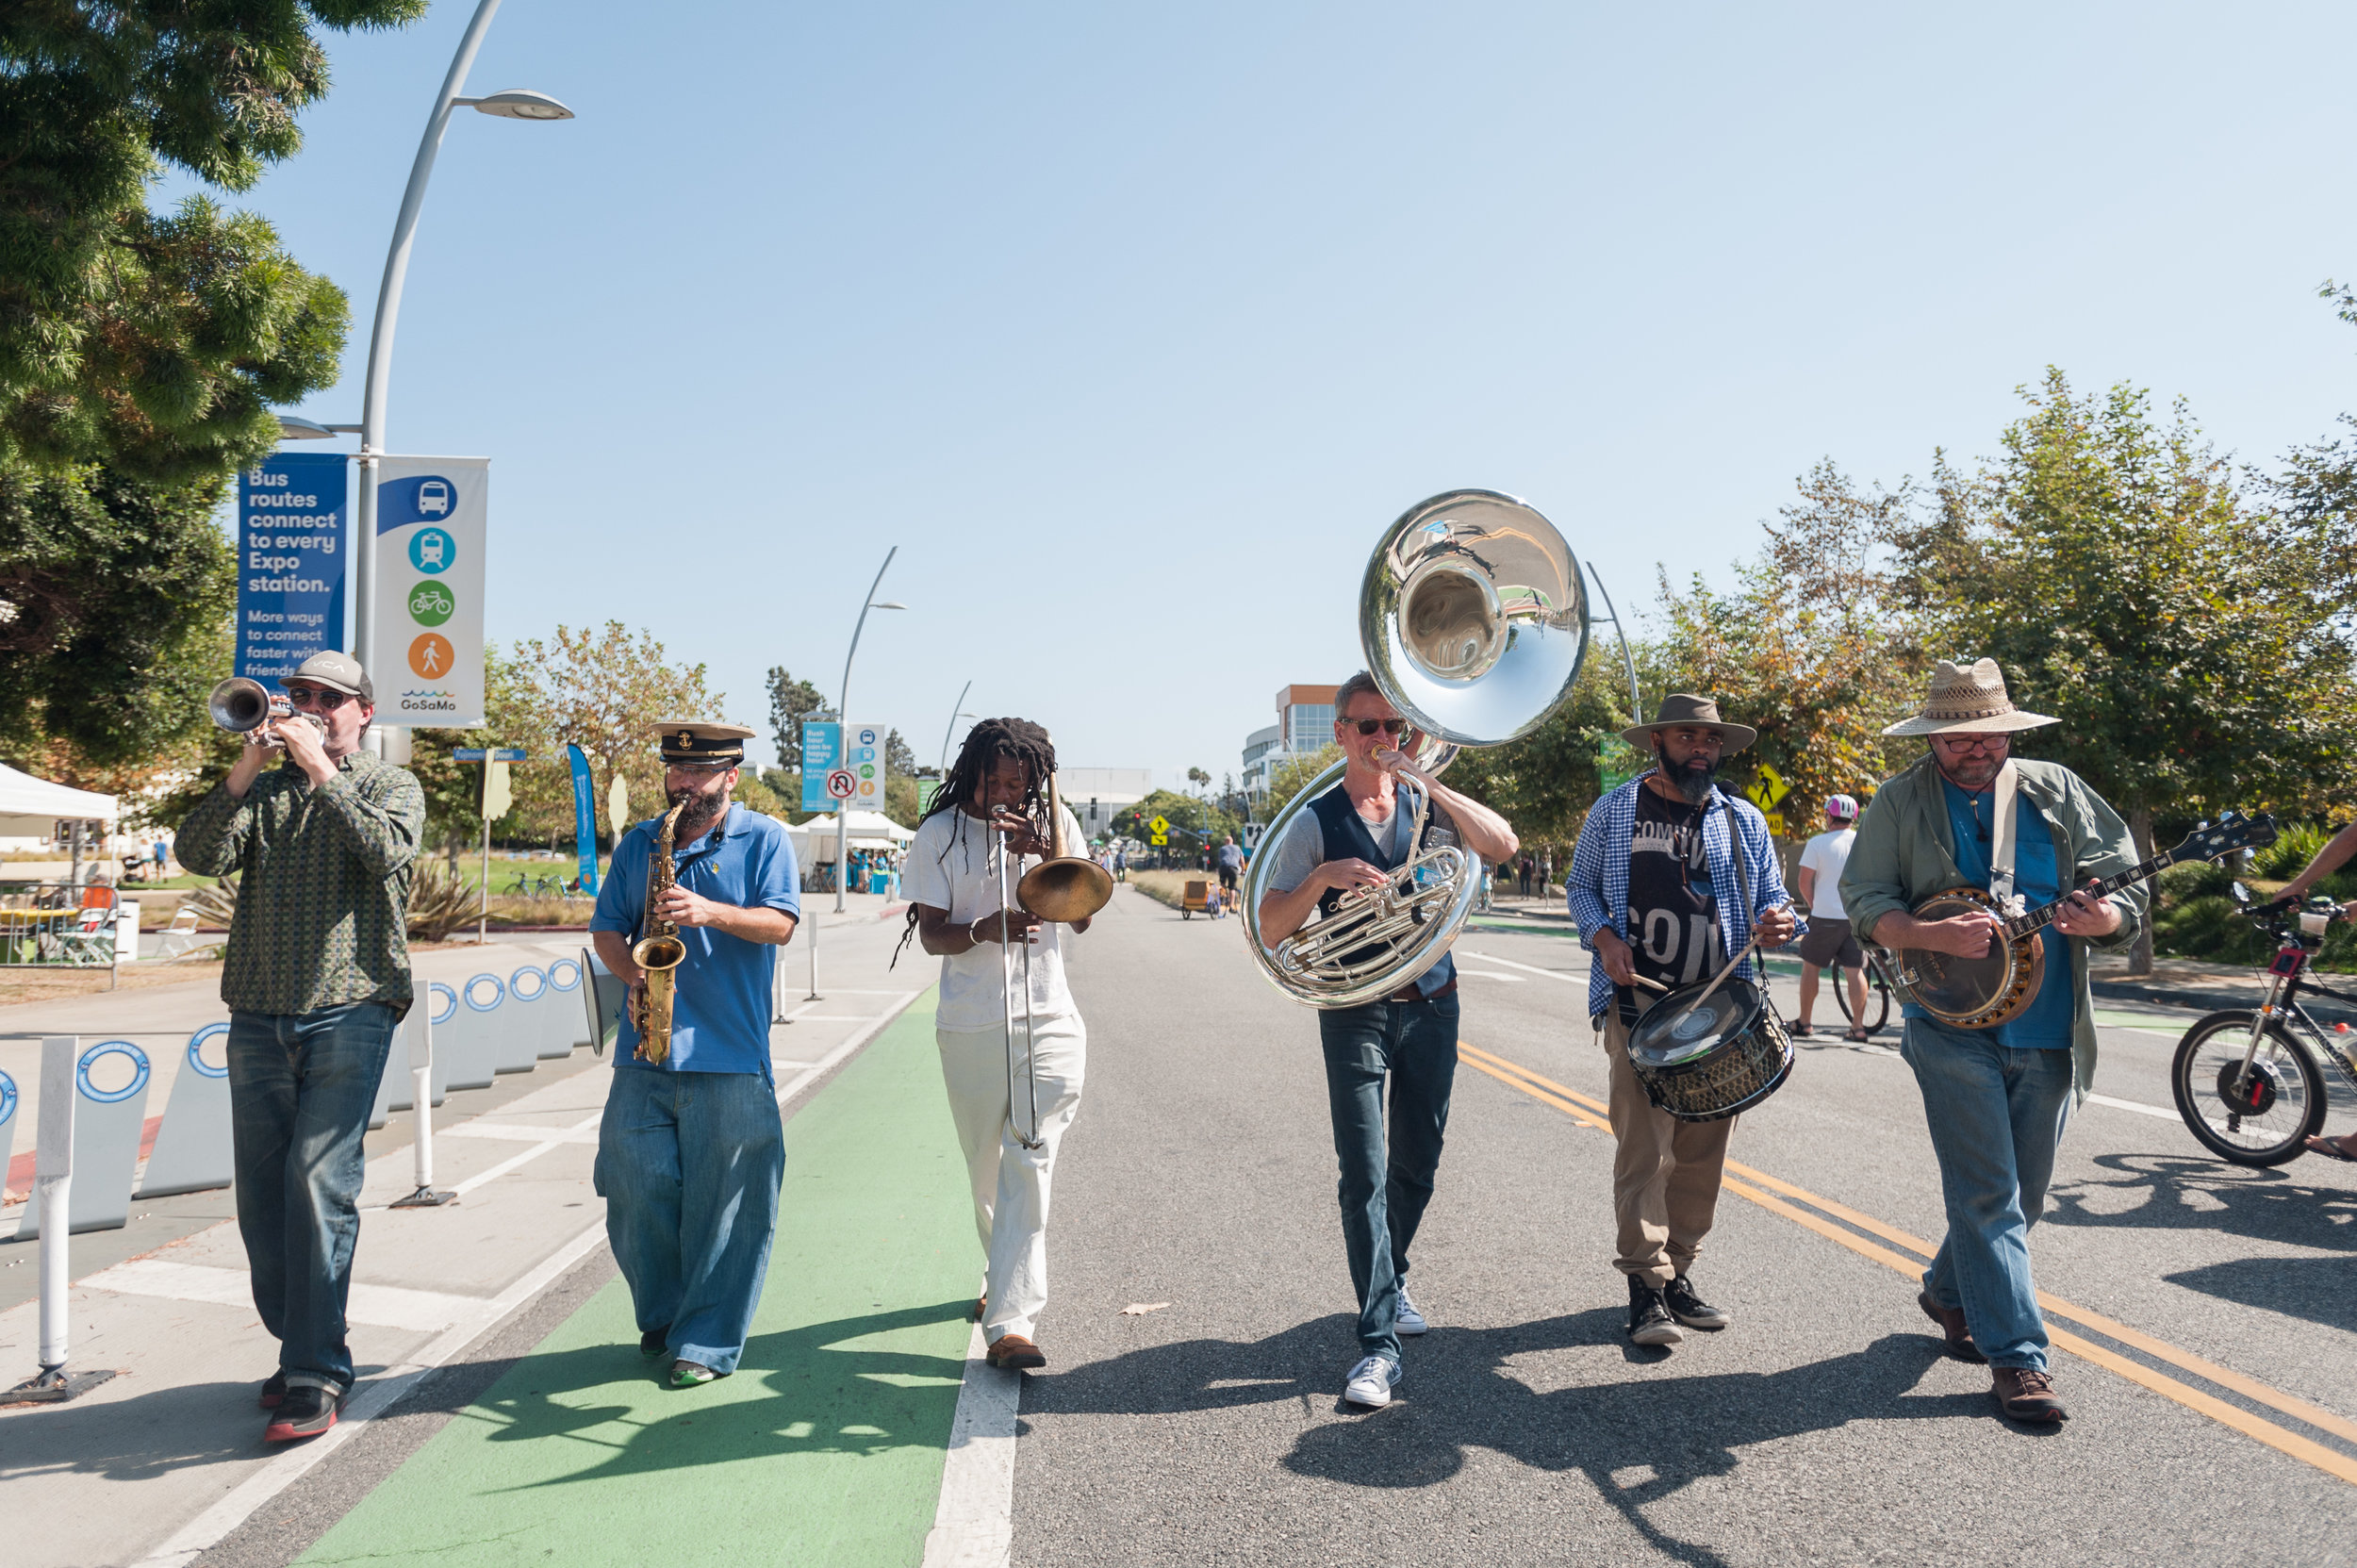  A group of musicians formed a small marching band to play music through the closed streets of Santa Monica during COAST and paraded along mainstreet playing songs. The second ever COAST was held in Santa Monica, Calif.. (Photo by: Justin Han/Corsair